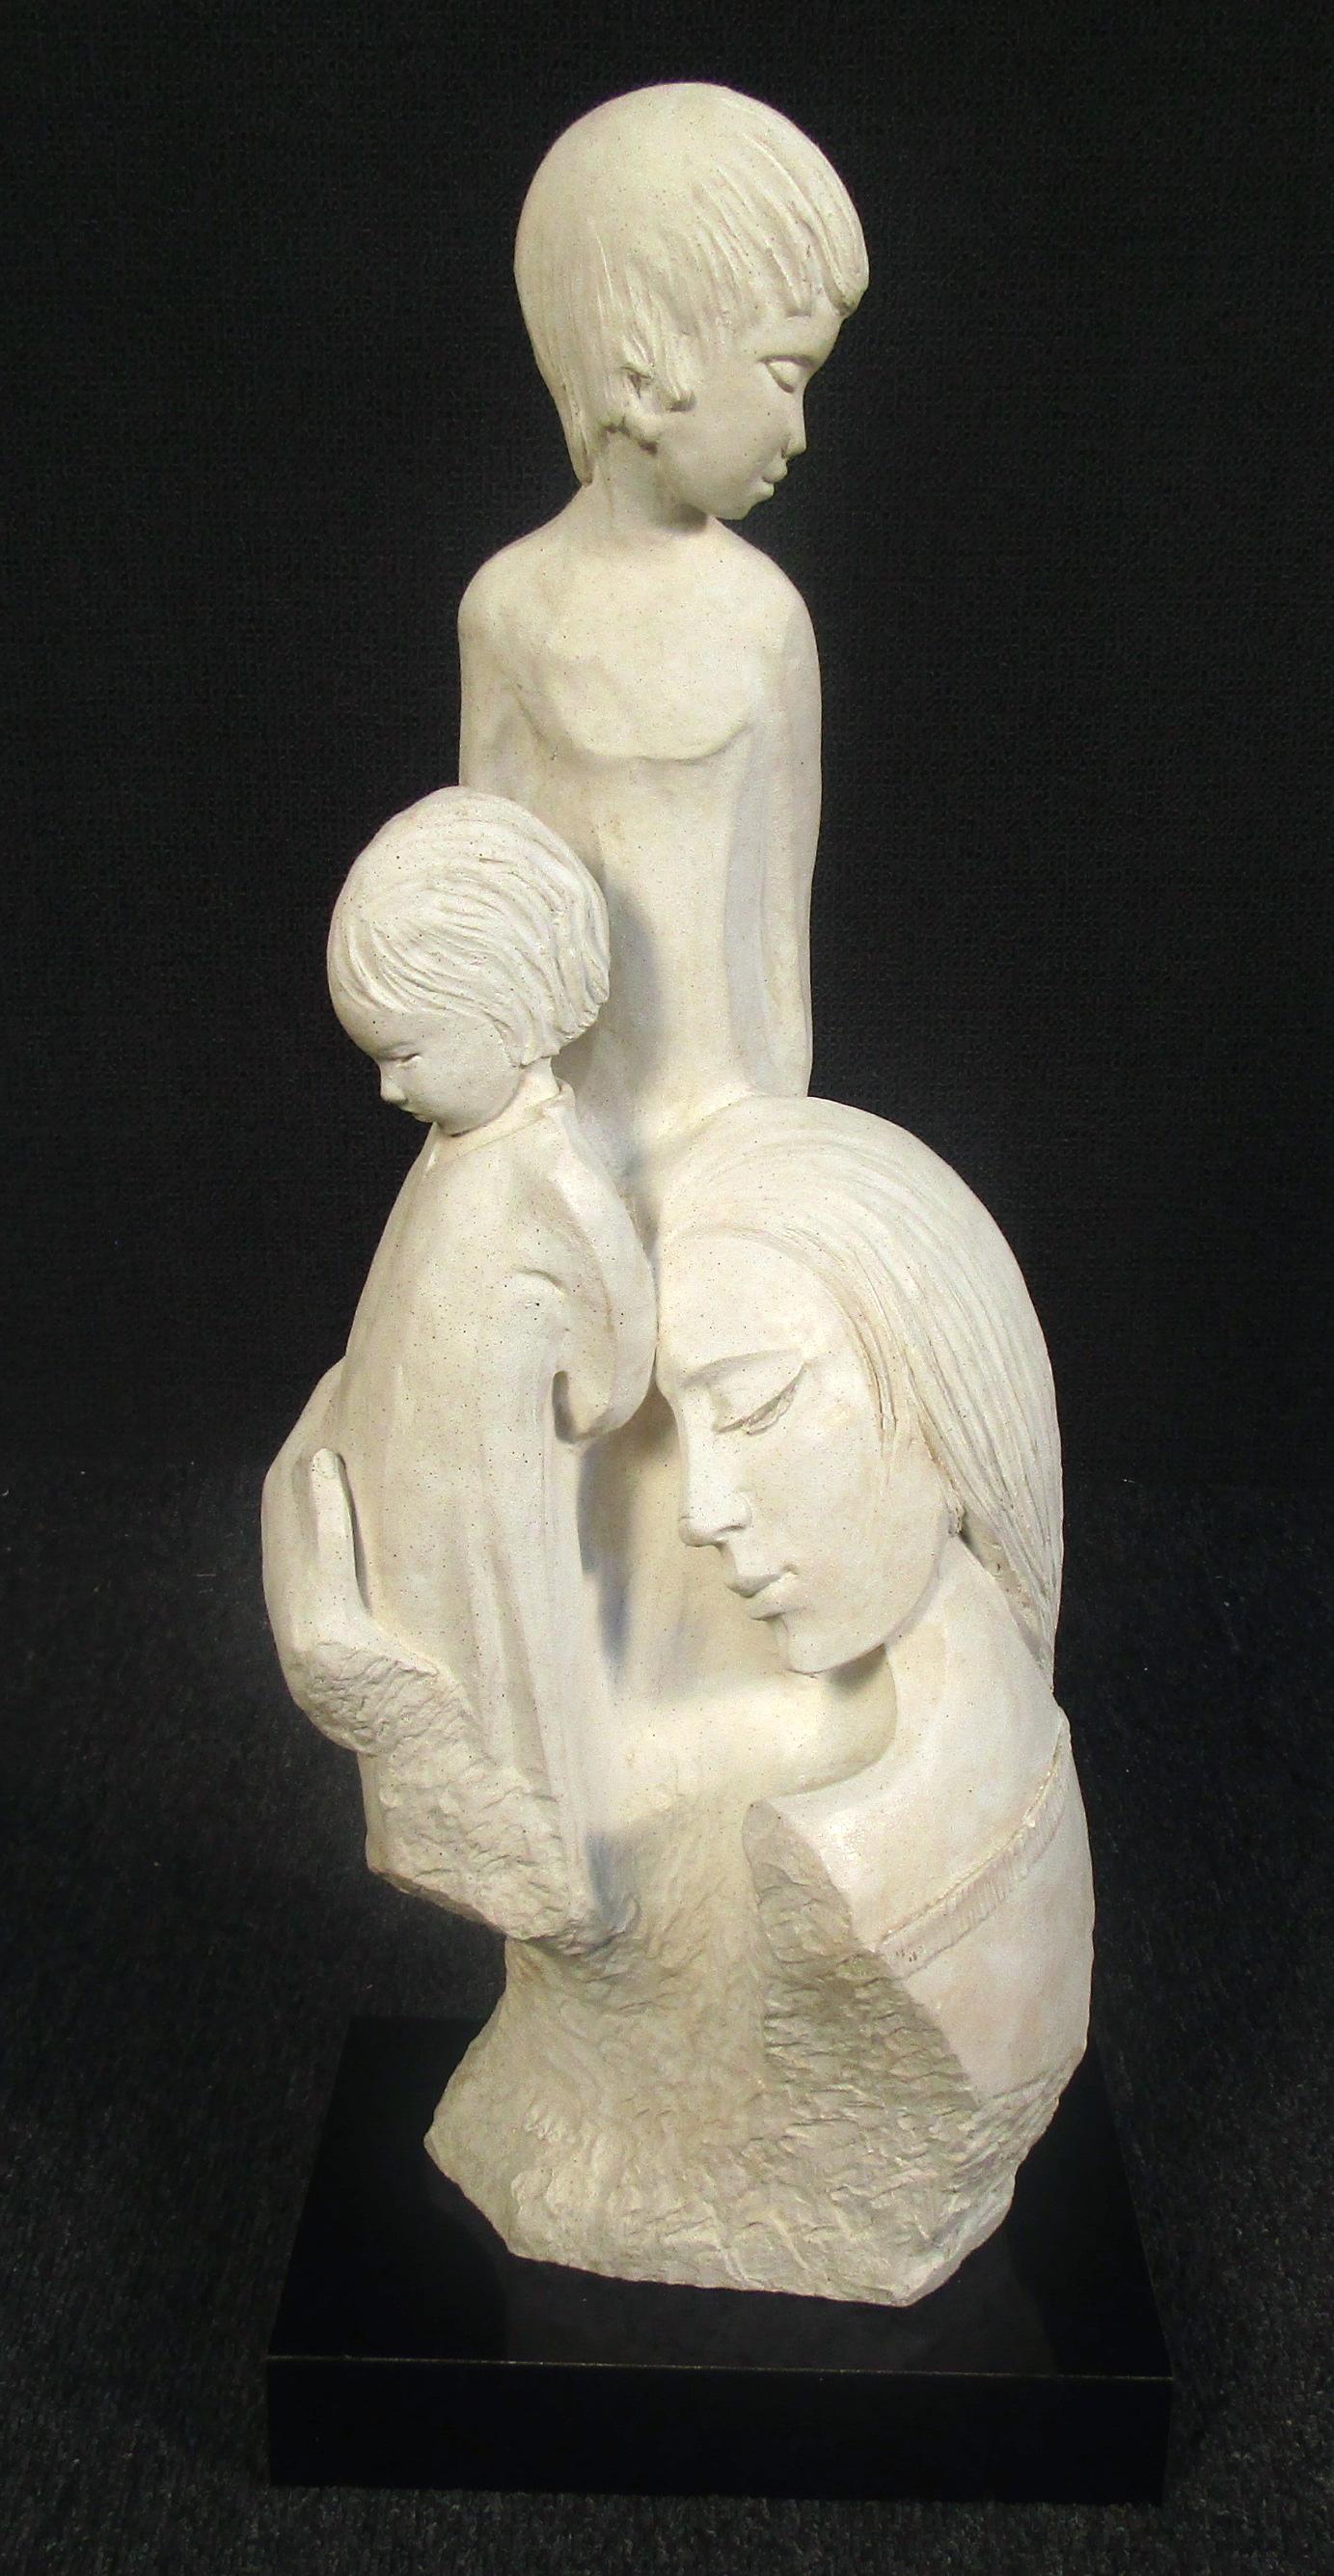 Vintage modern sculpture featuring a mother and two children. This unique beautifully detailed sculpture would make a beautiful addition to any art collection, and would look stunning on your mantle or bookcase.

Please confirm item location with